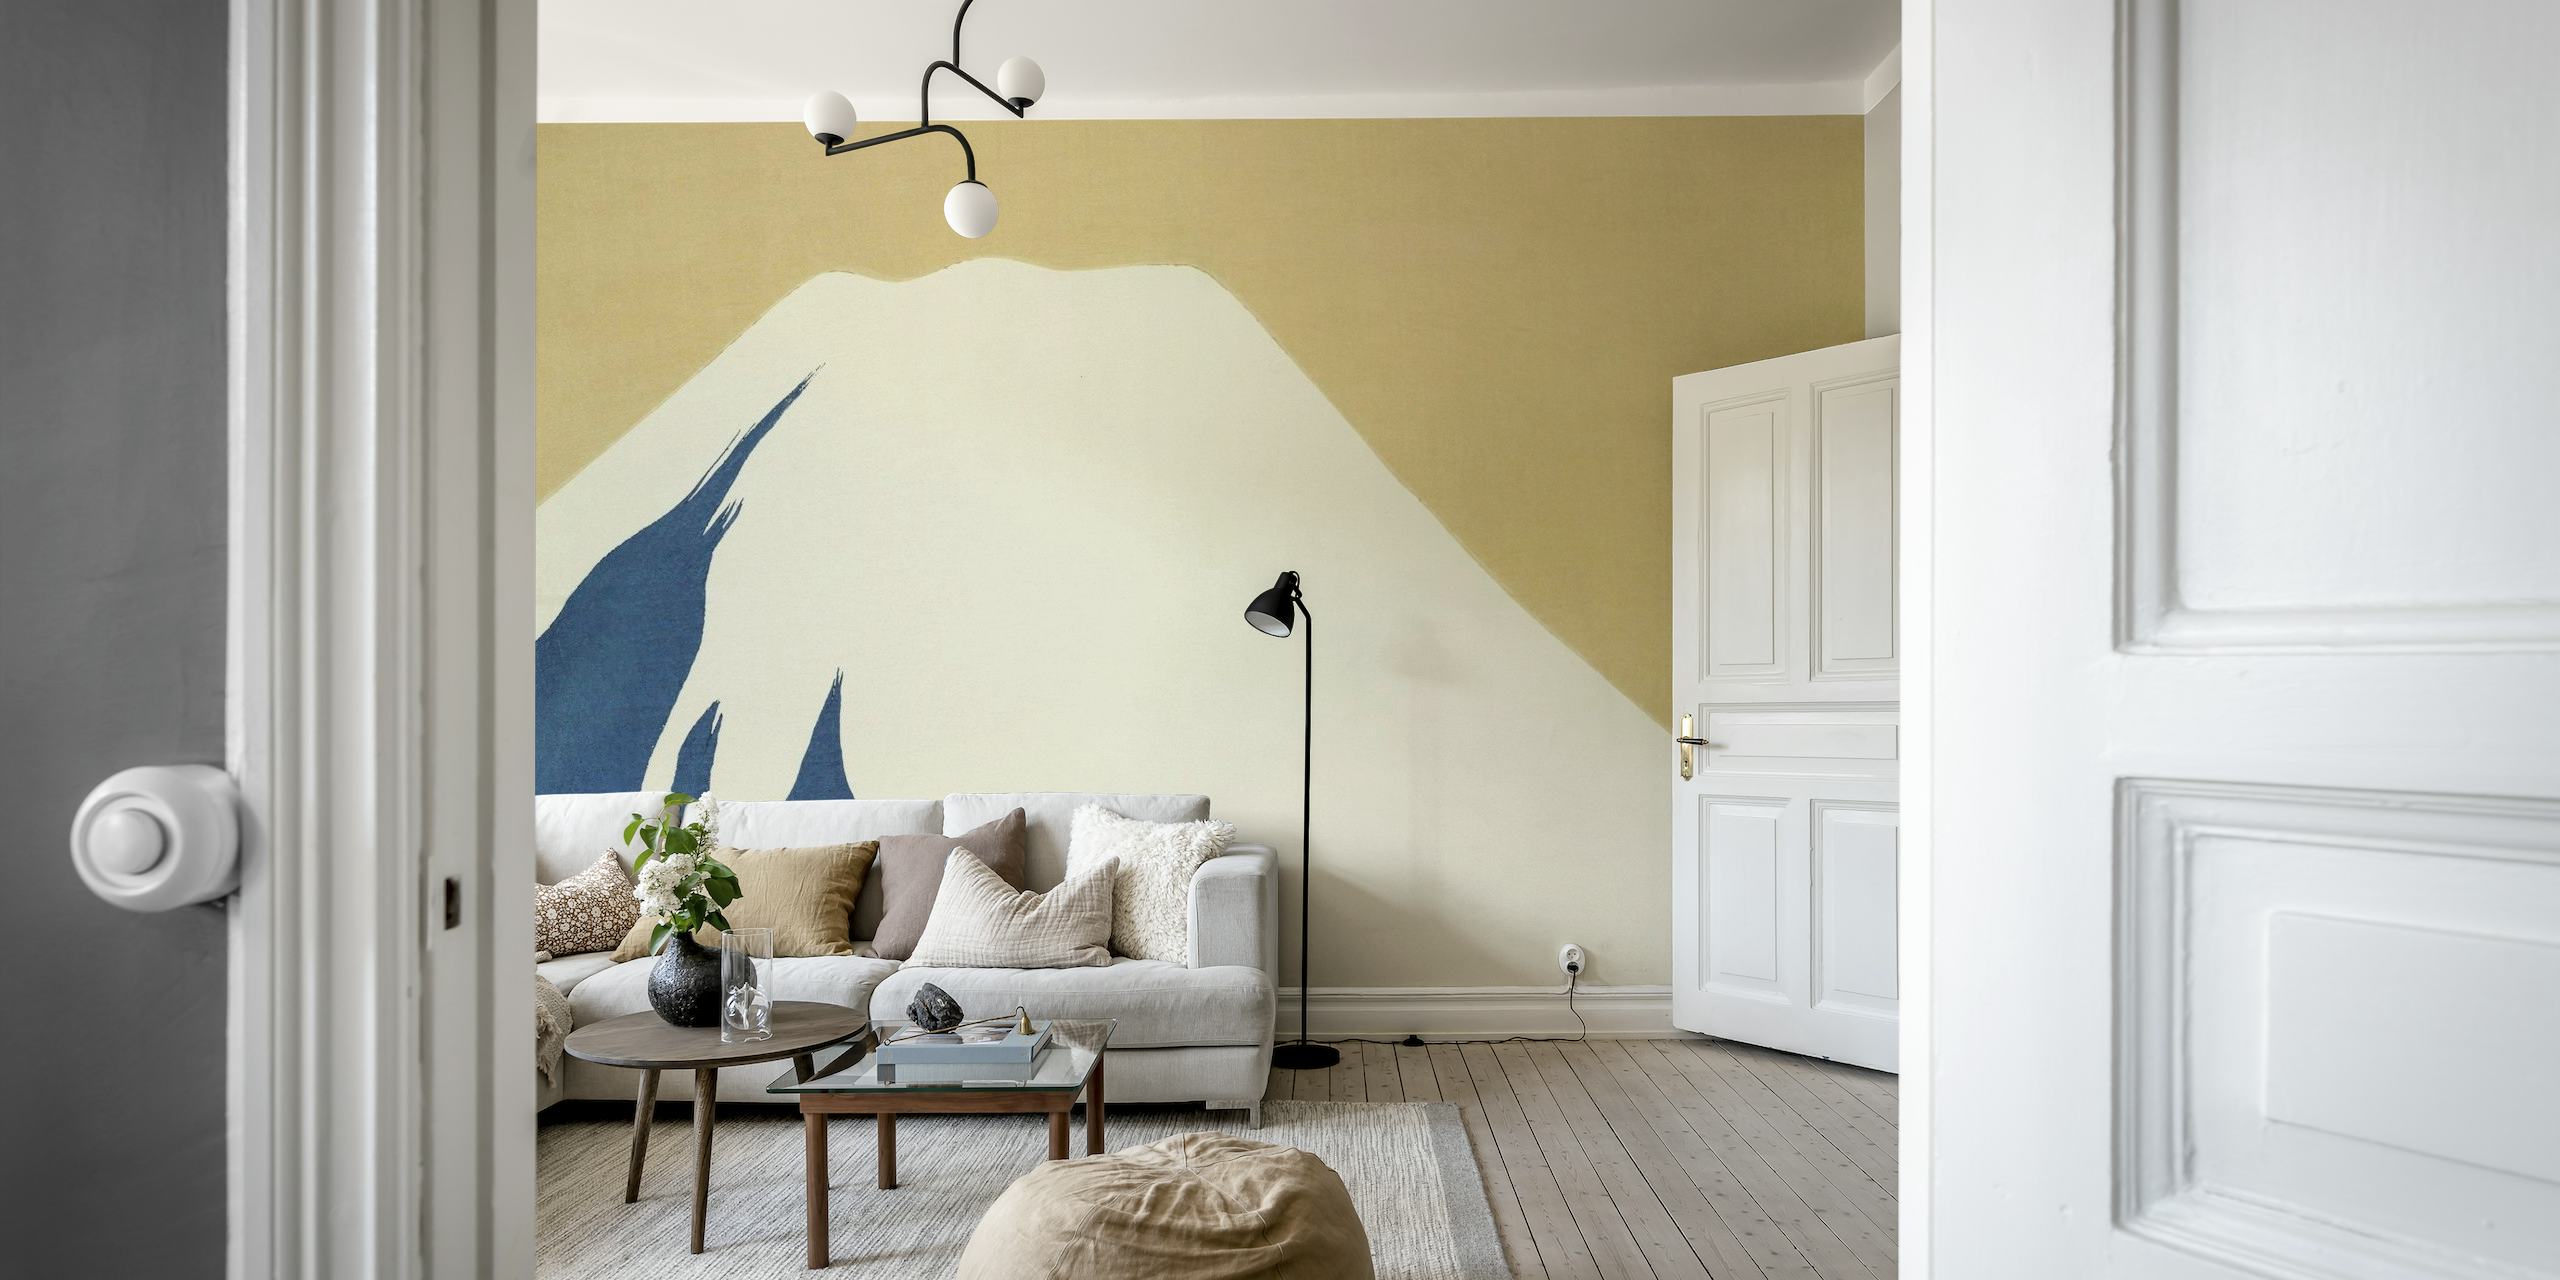 Mount Fuji wall mural with minimalist art style depicting the snow-capped summit